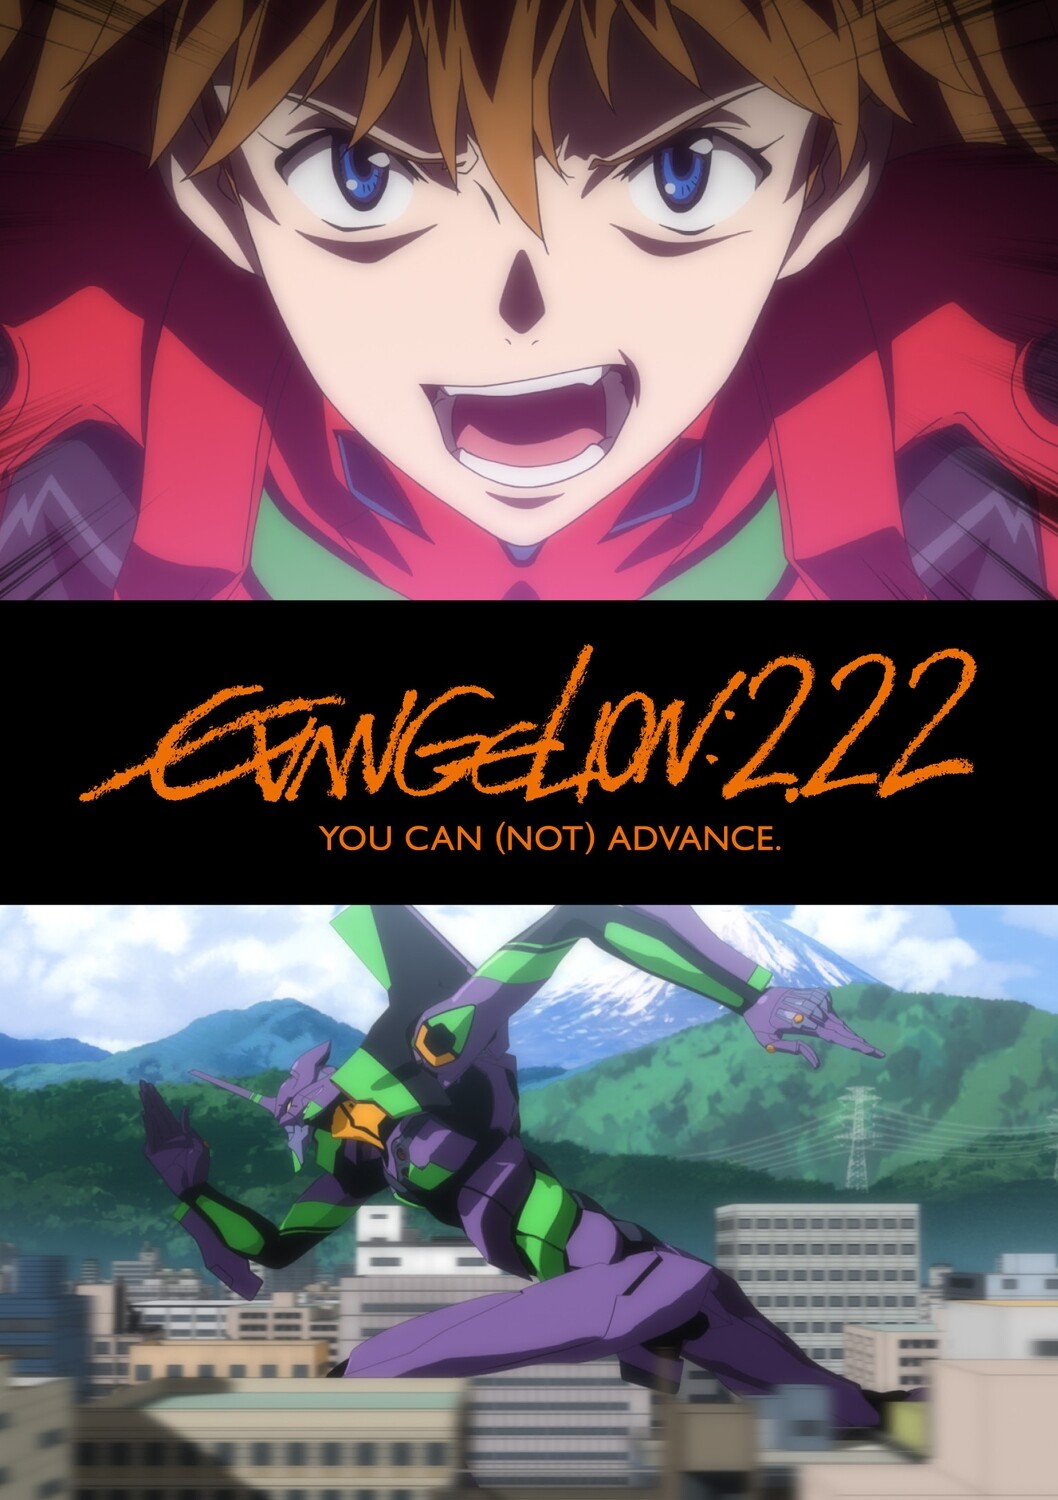 Evangelion 2.22 - You Can (Not) Advance, DVD / Blu Ray: DVD